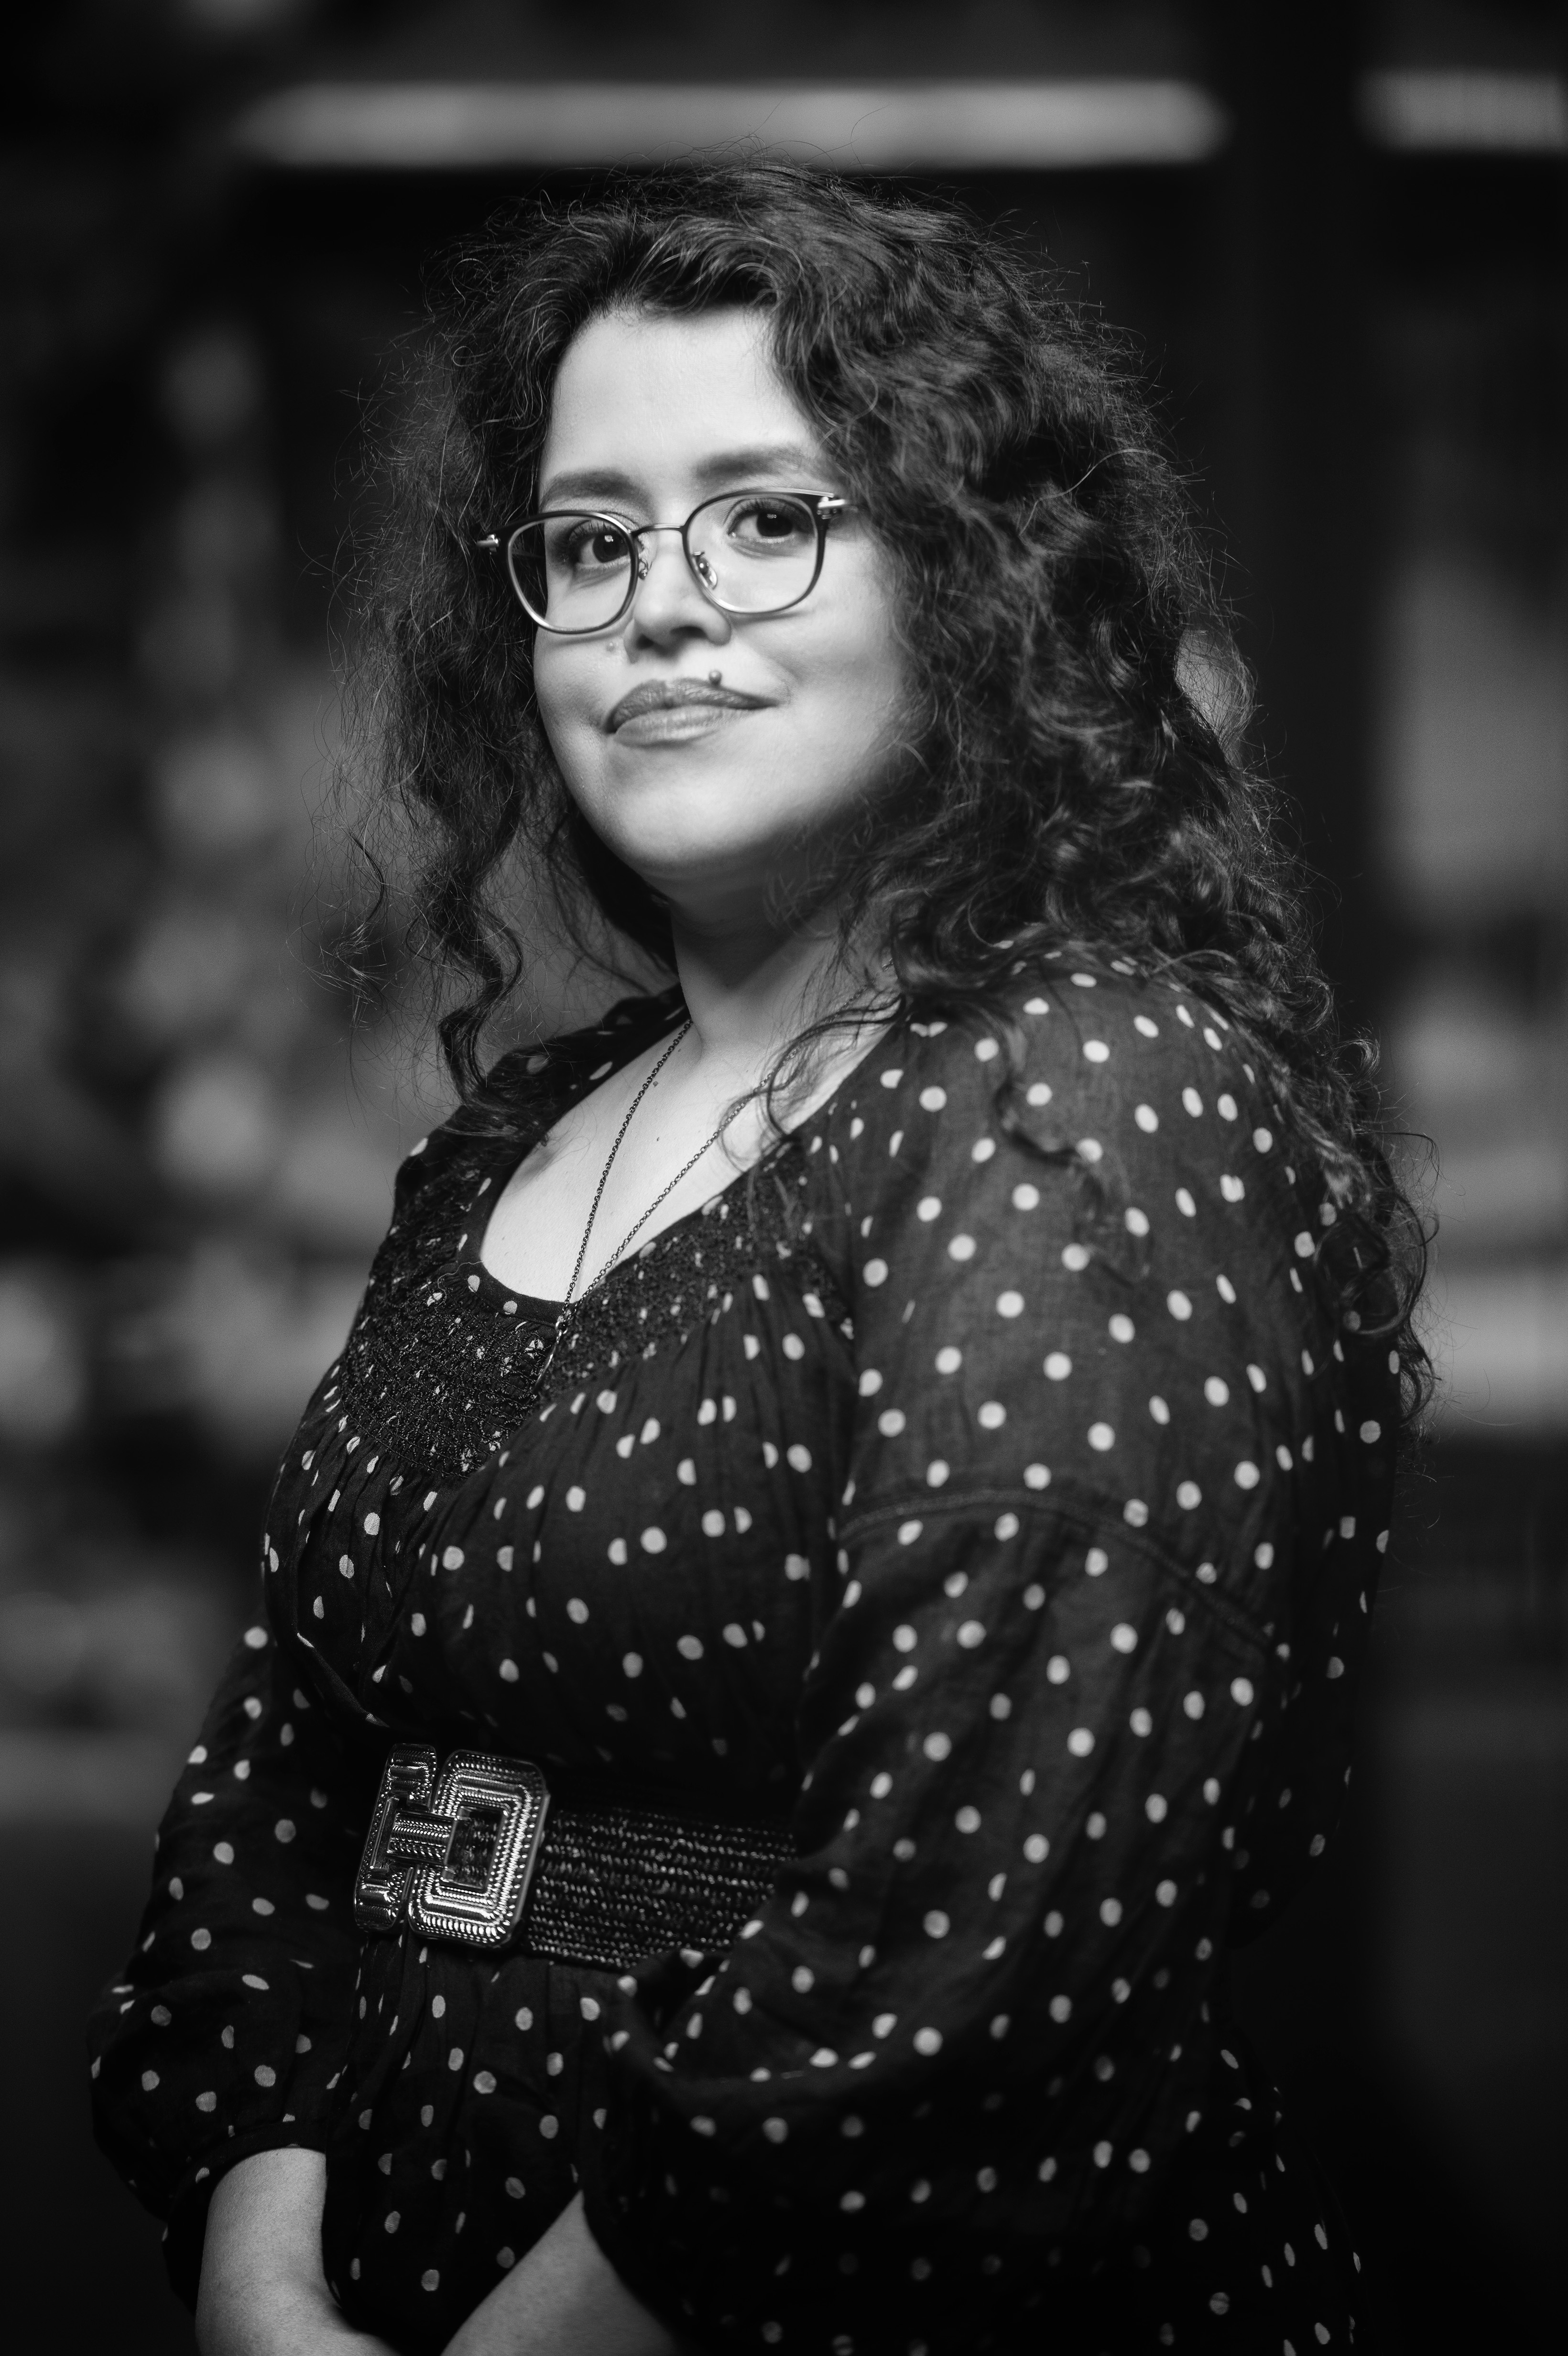  A grayscale portrait of a woman with curly hair, glasses, and a lip piercing. She is wearing a dark polka-dot dress with a wide, decorative belt. The background is softly blurred, drawing attention to her confident expression.